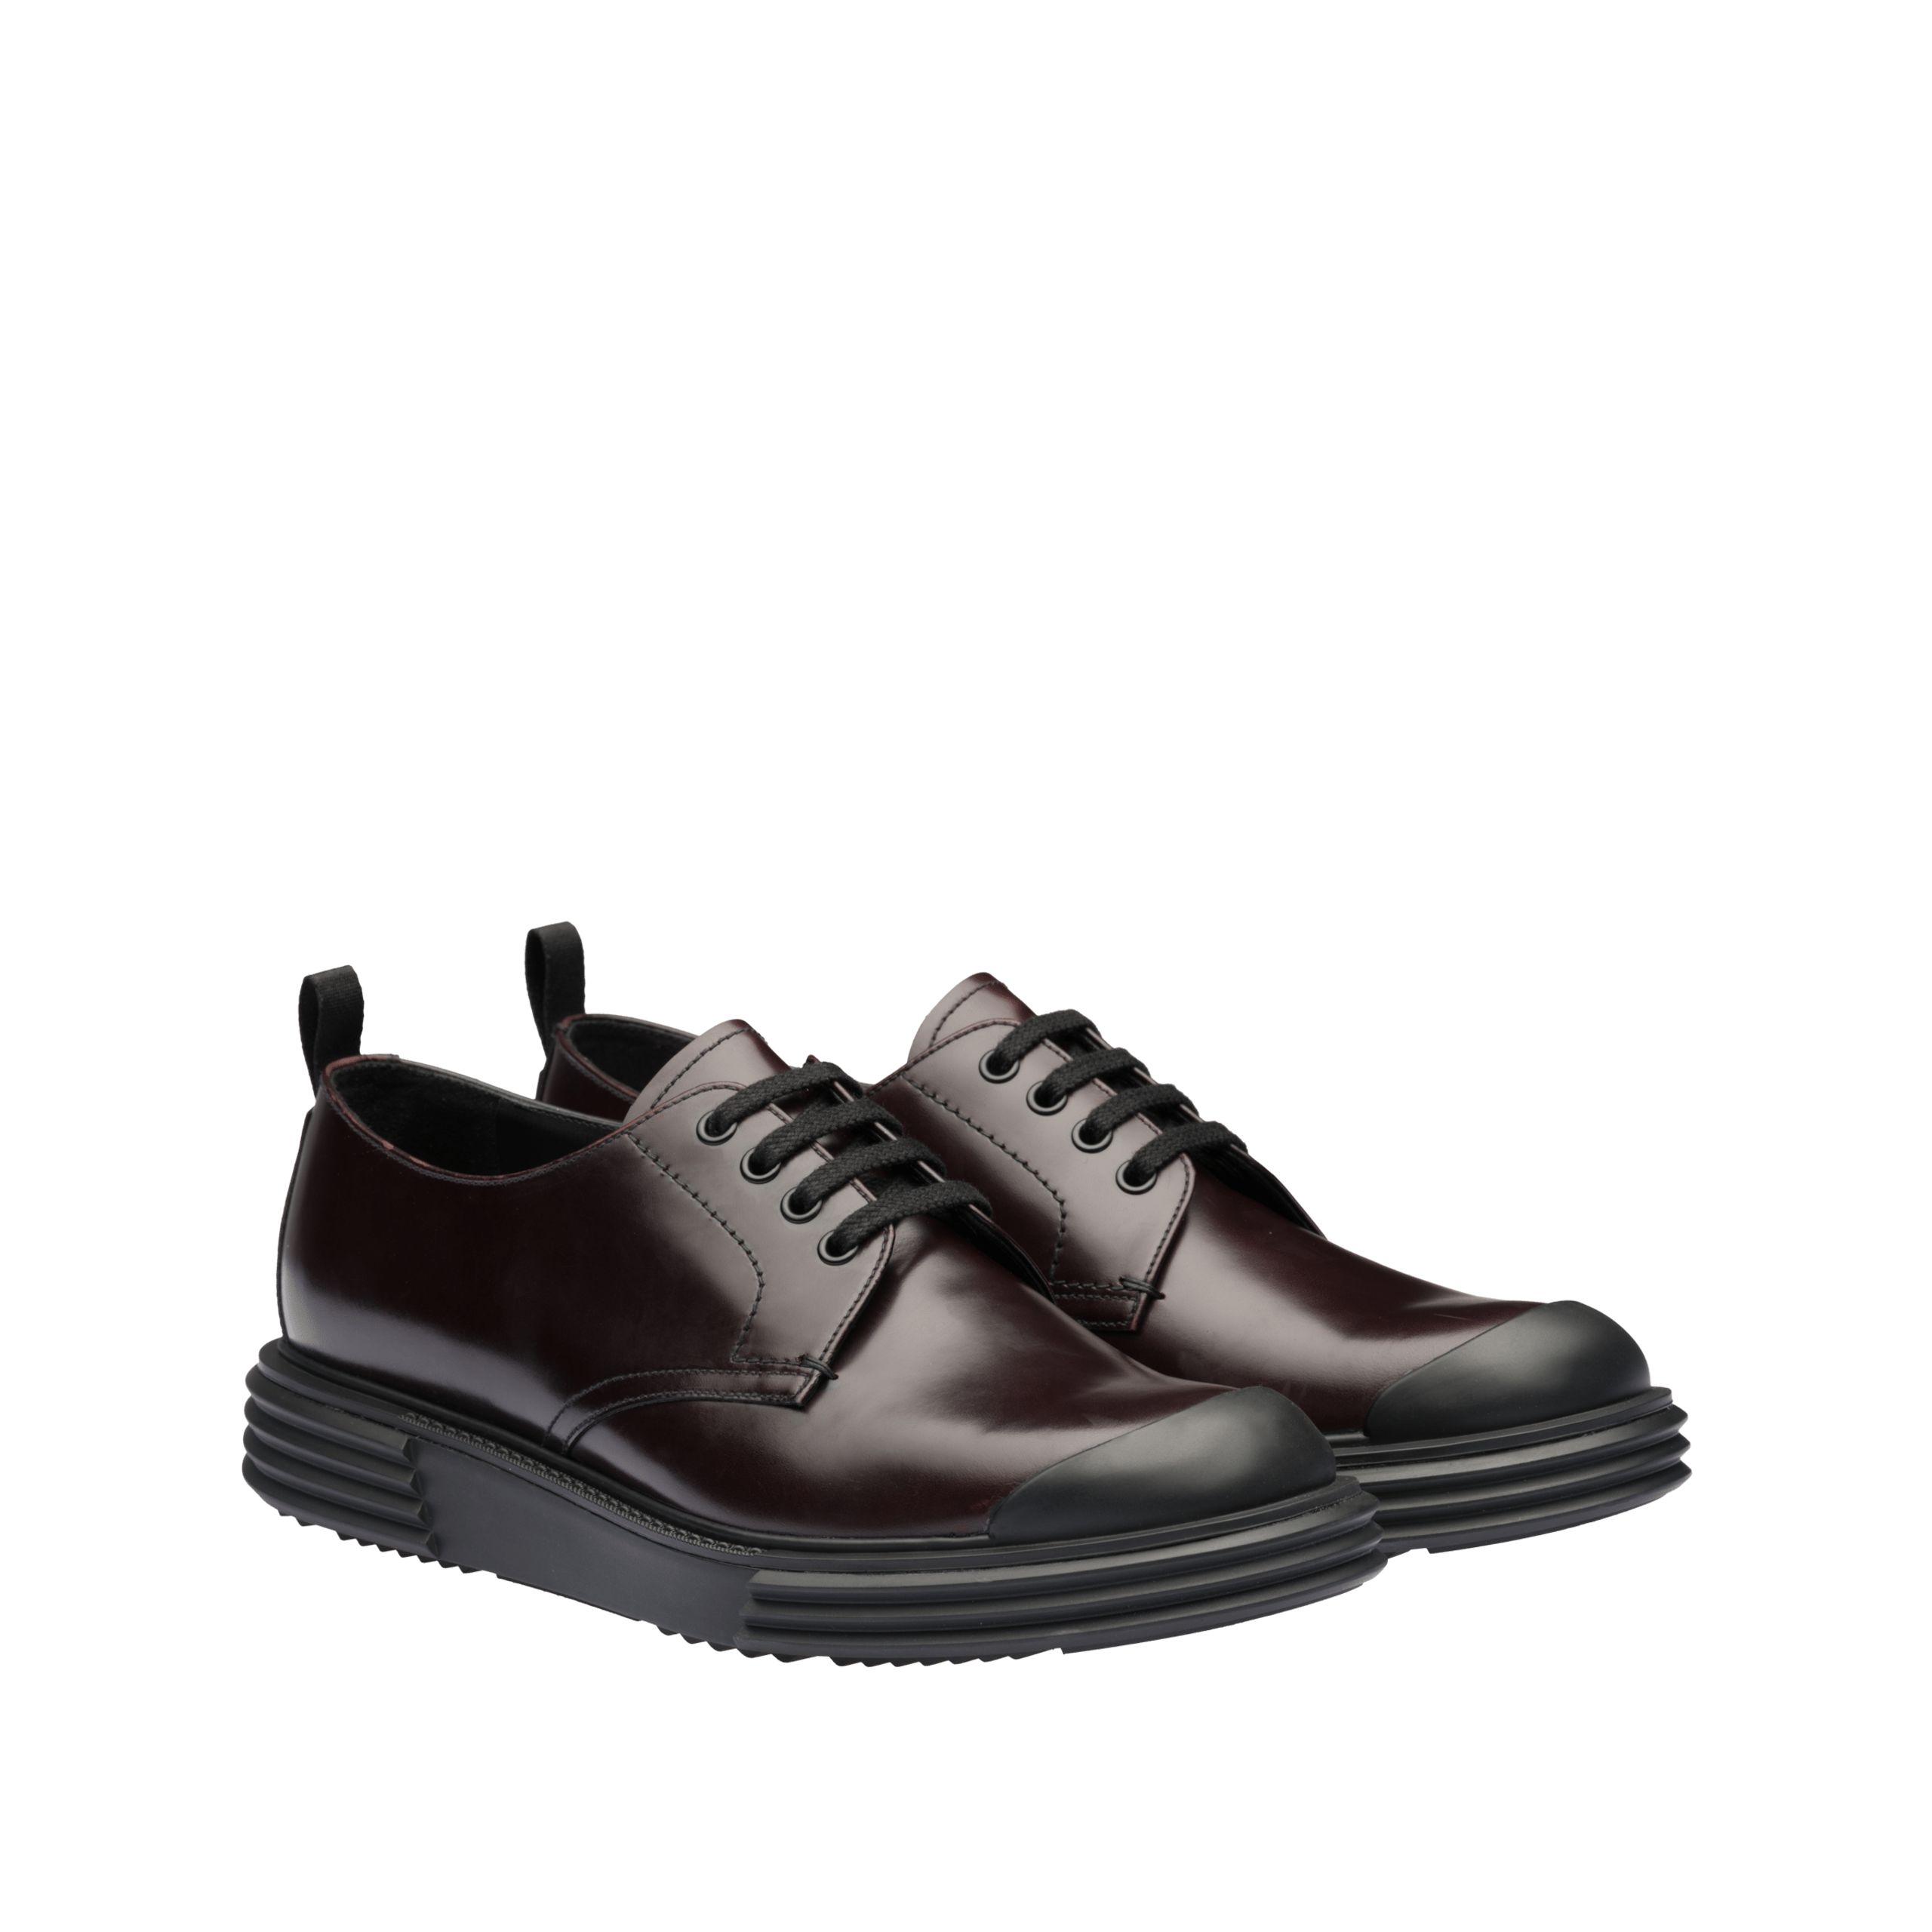 Prada Opaque Leather Derby Shoes in Black for Men